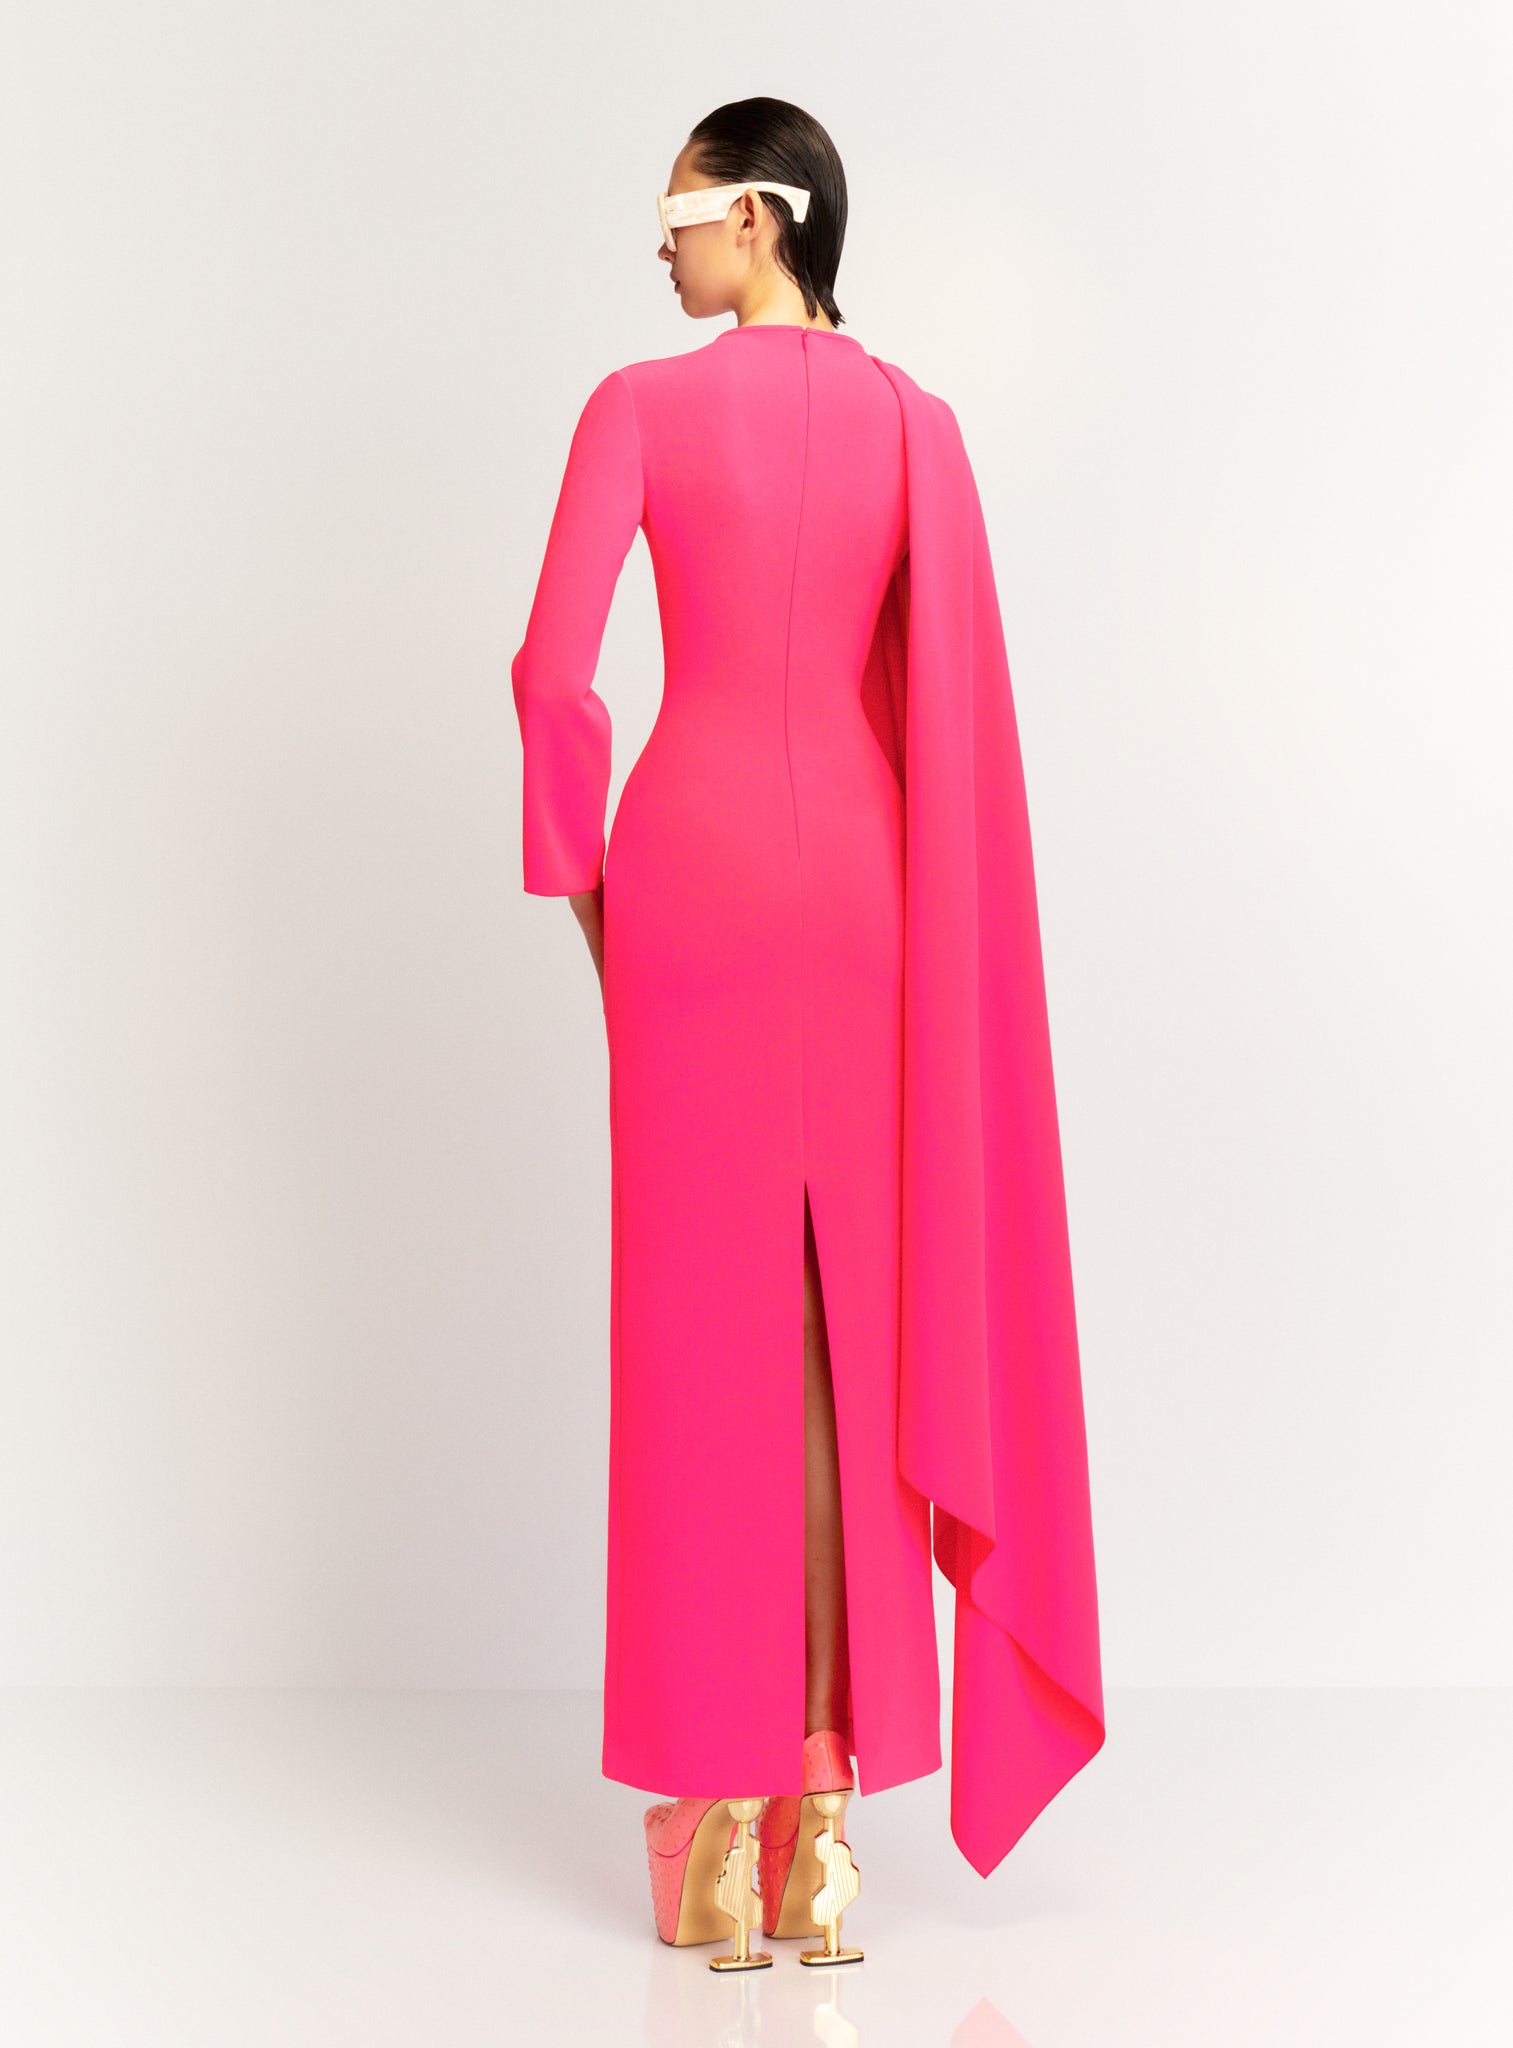 The Lydia Maxi Dress in Ultra Pink